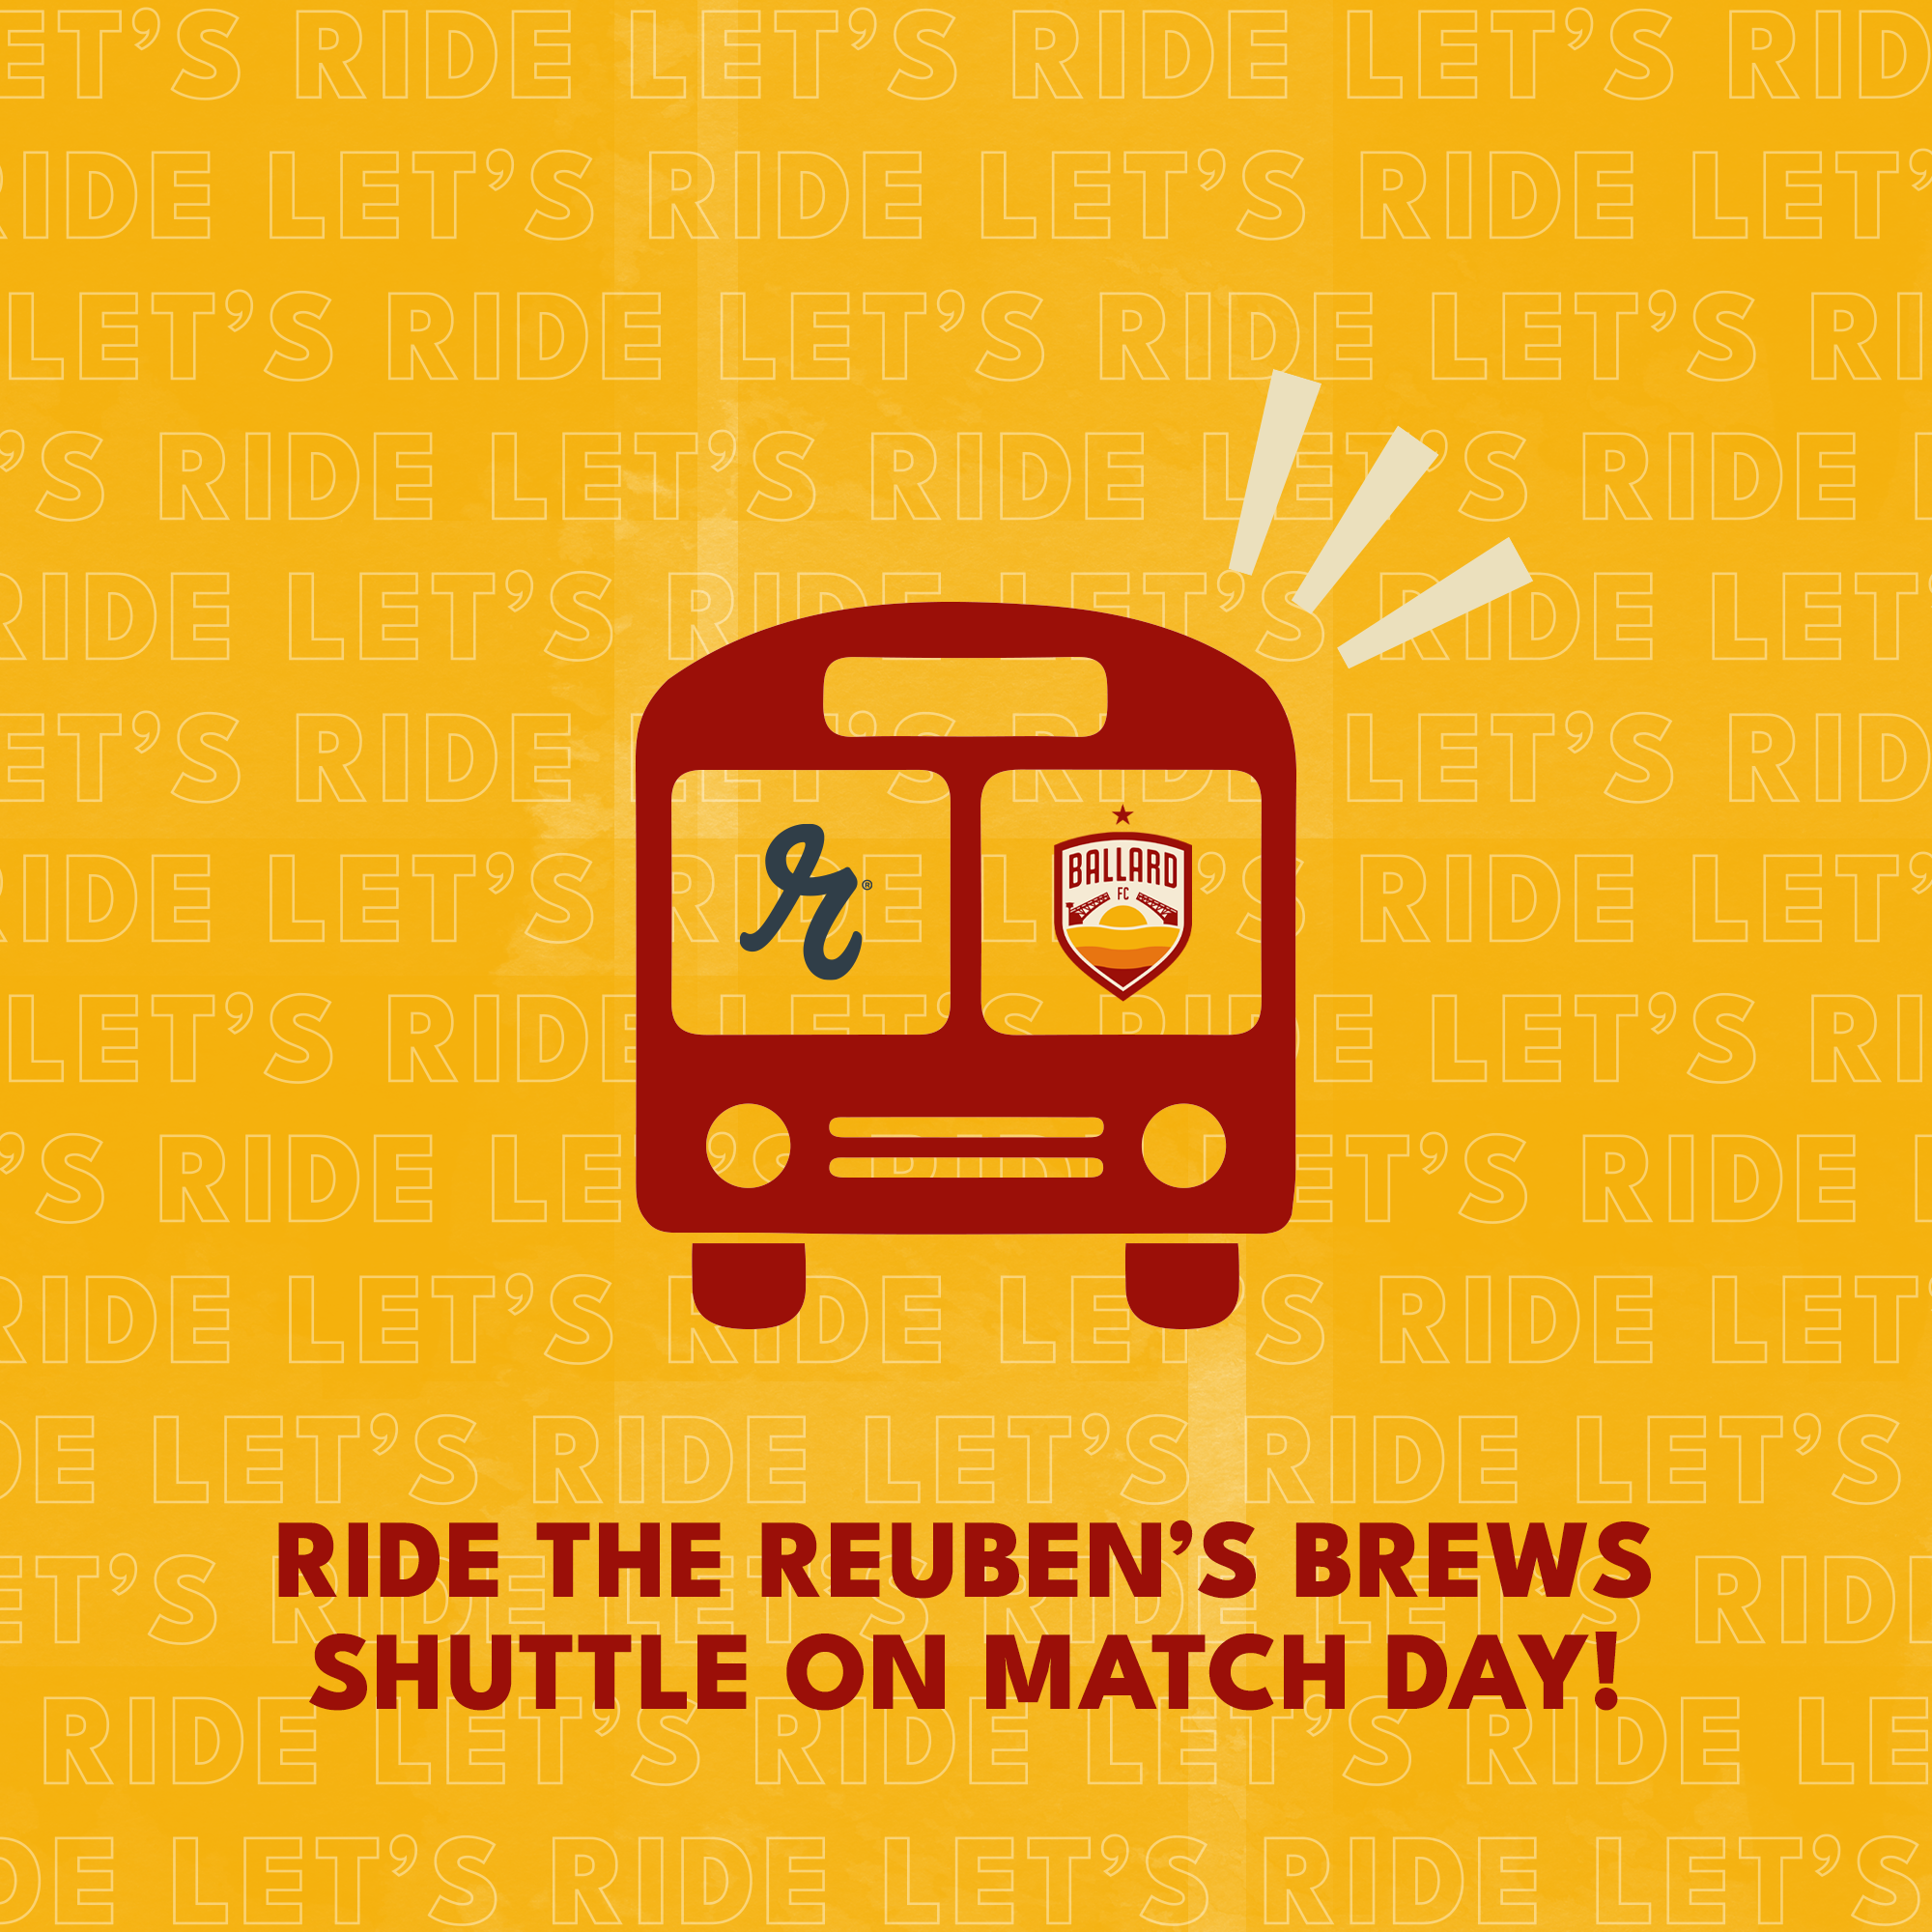 Ballard FC Teams Up with Reuben's Brews to Launch Match Day Shuttle Service featured image